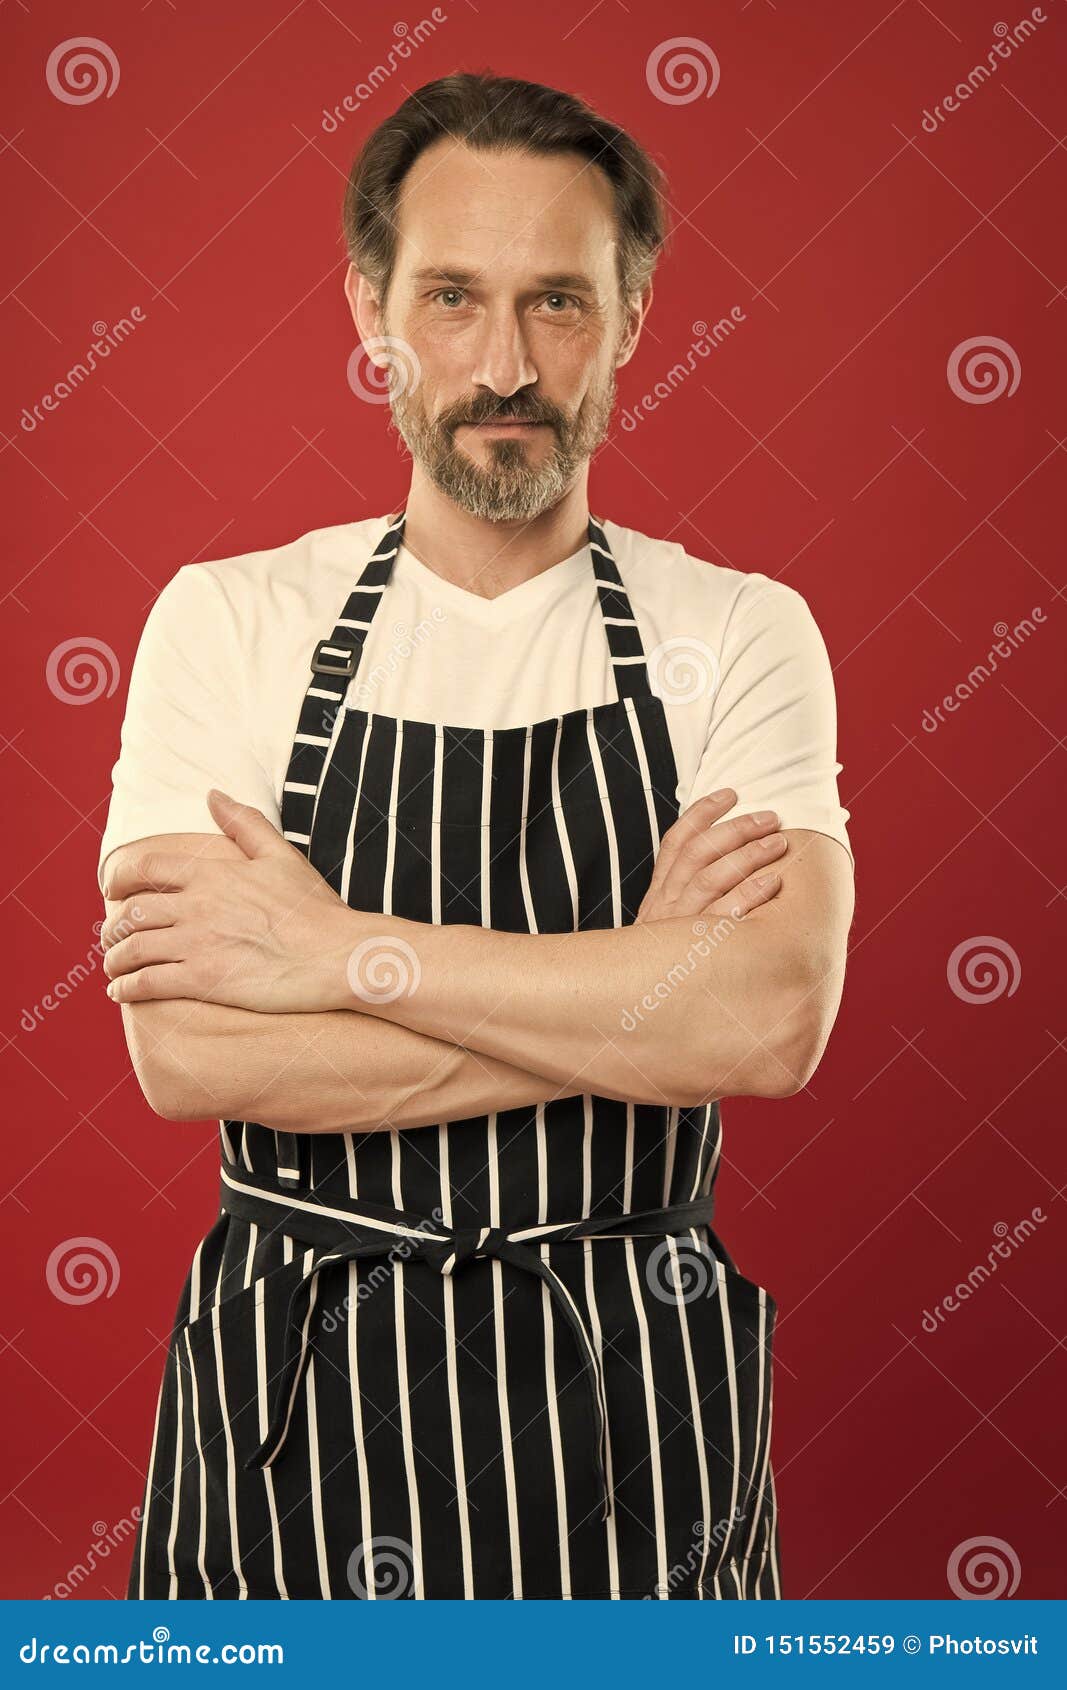 Handsome And Confident Mature Person In Cooking Apron Bearded Mature Man In Striped Apron 